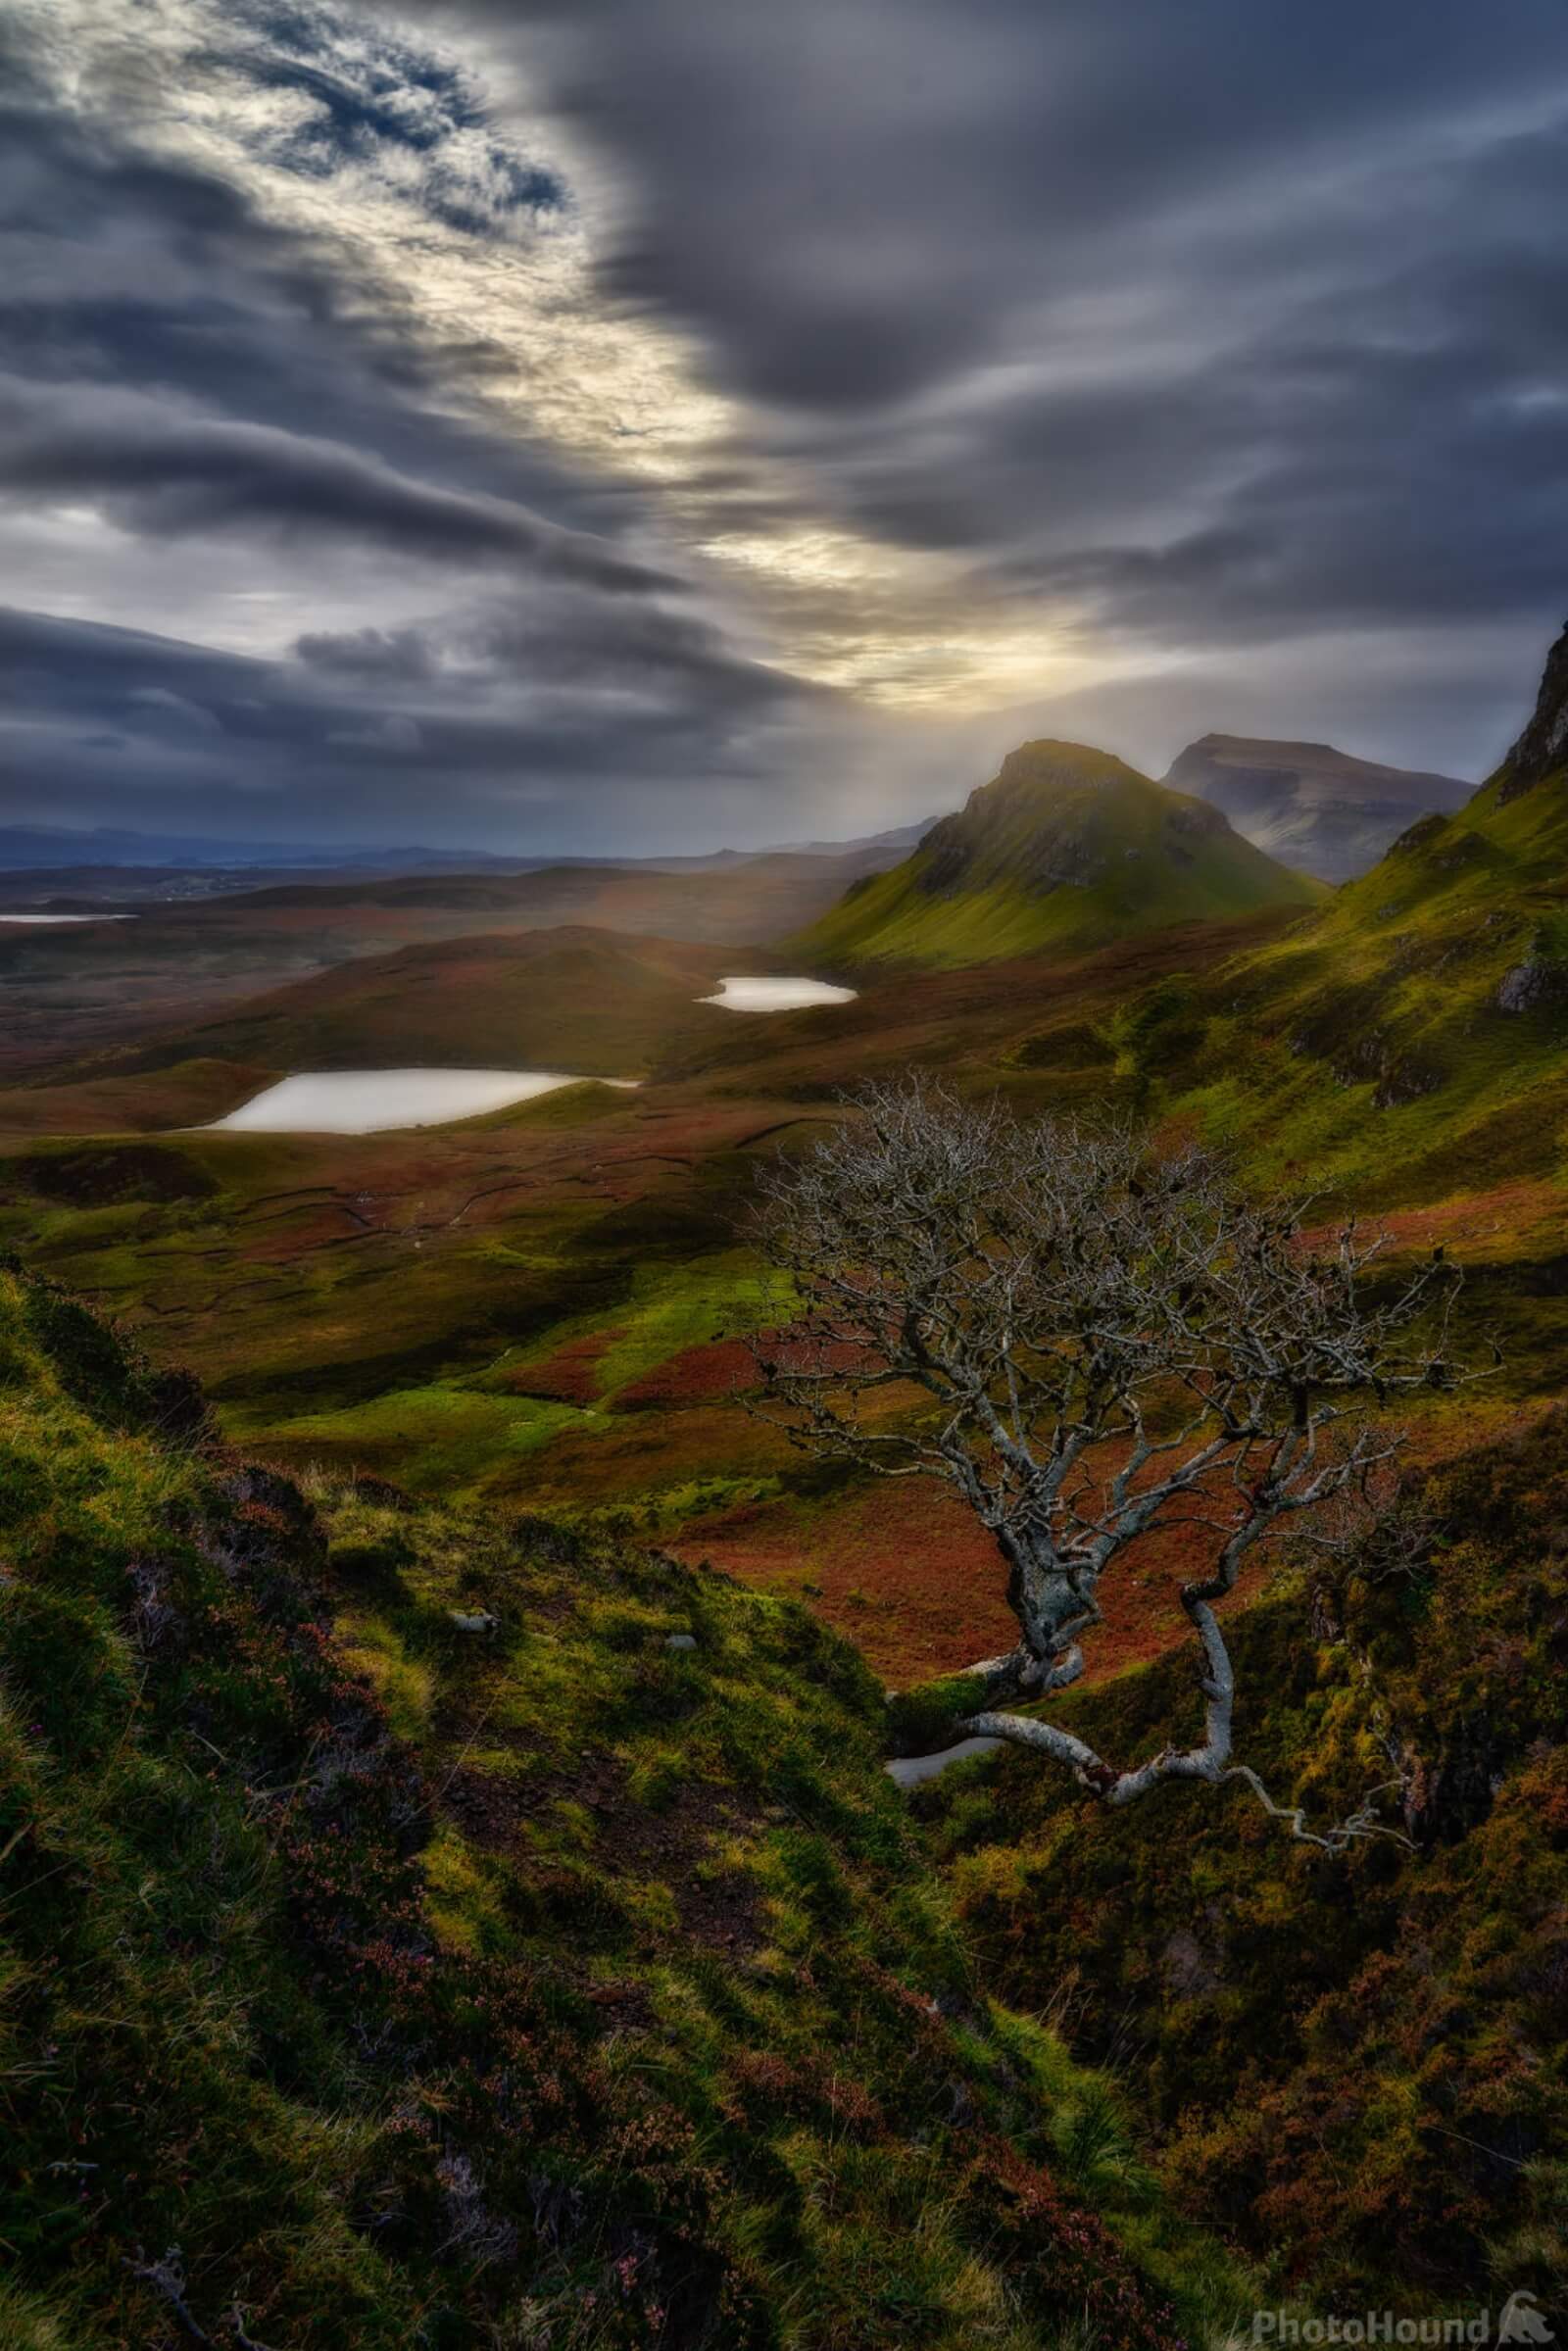 Image of The Quiraing by Peter Zalabai